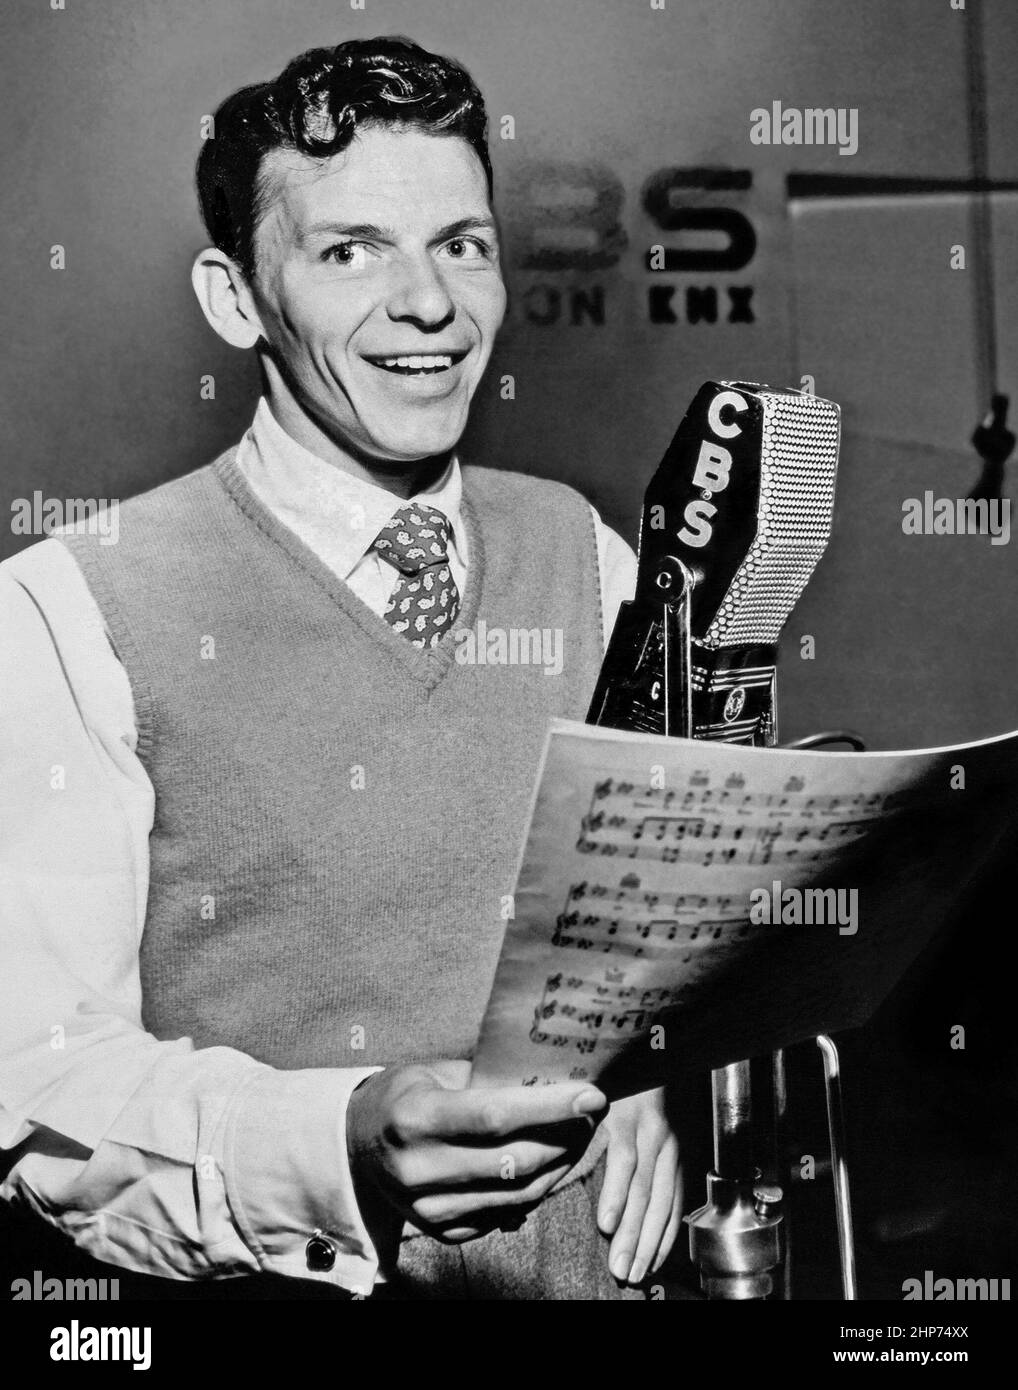 Publicity photo of Frank Sinatra in 1944 with a CBS microphone, promoting  The Frank Sinatra Show on CBS Radio Stock Photo - Alamy